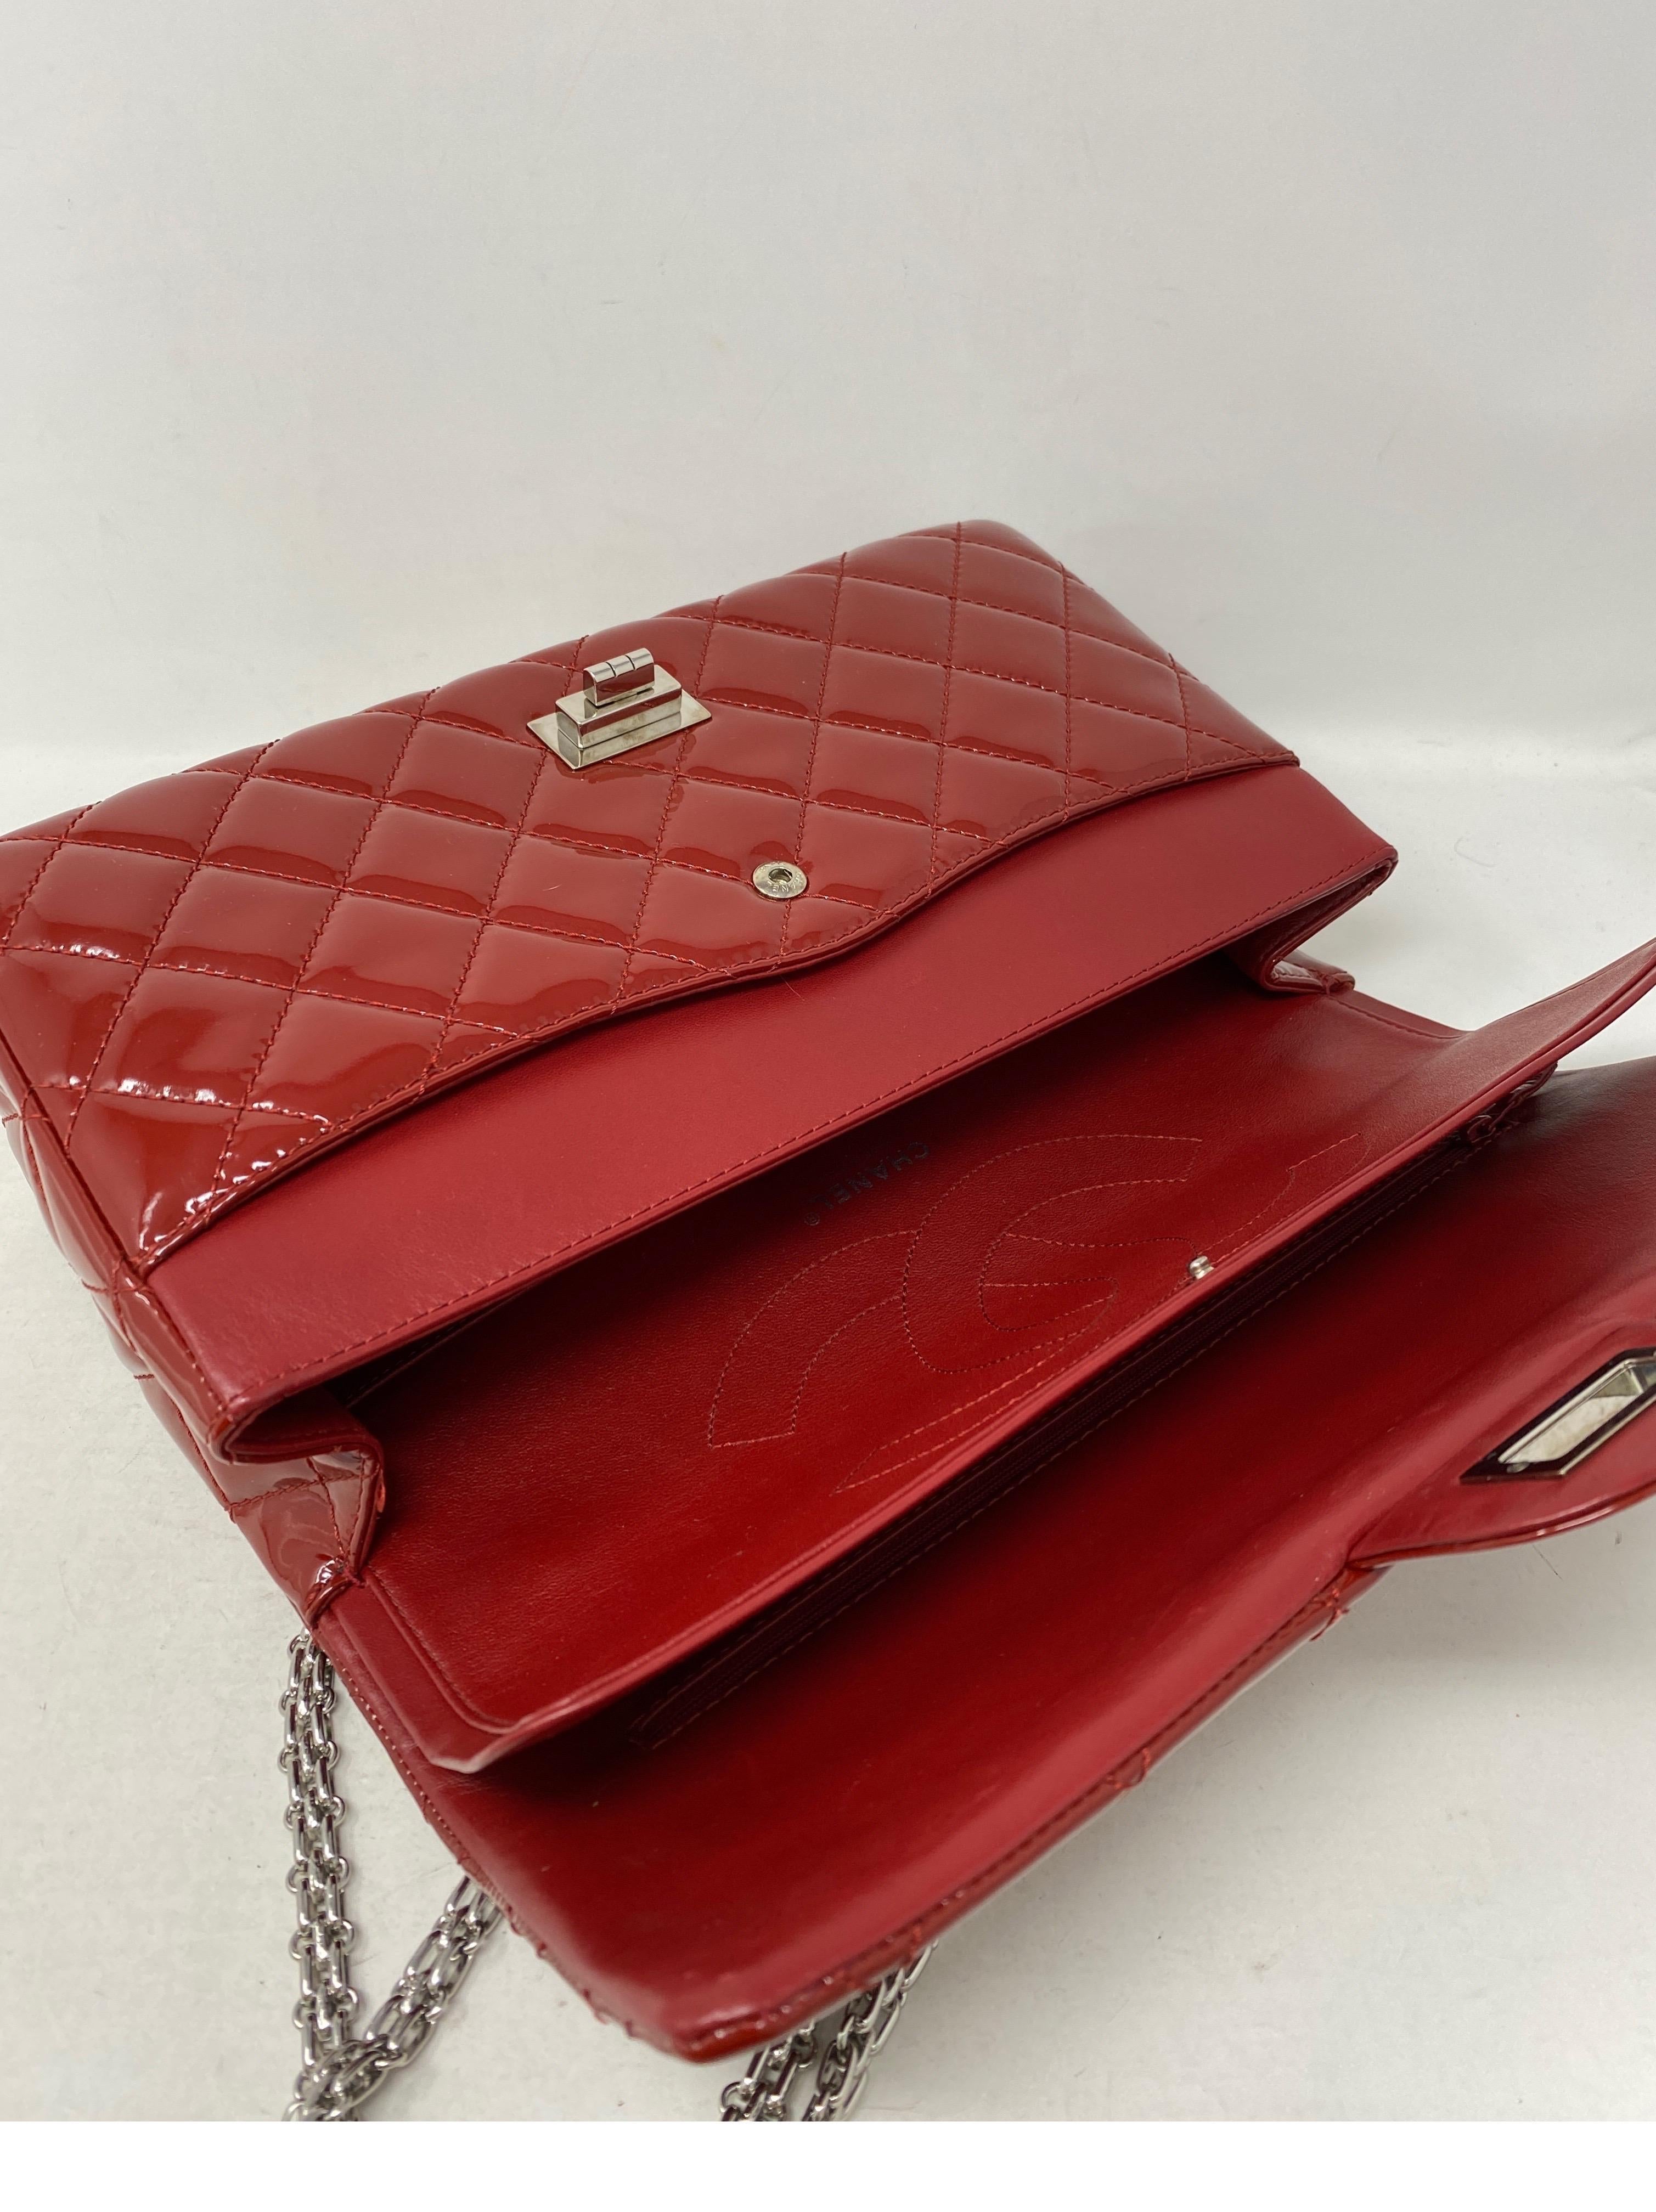 Chanel Red Jumbo Patent Reissue Leather Bag  9